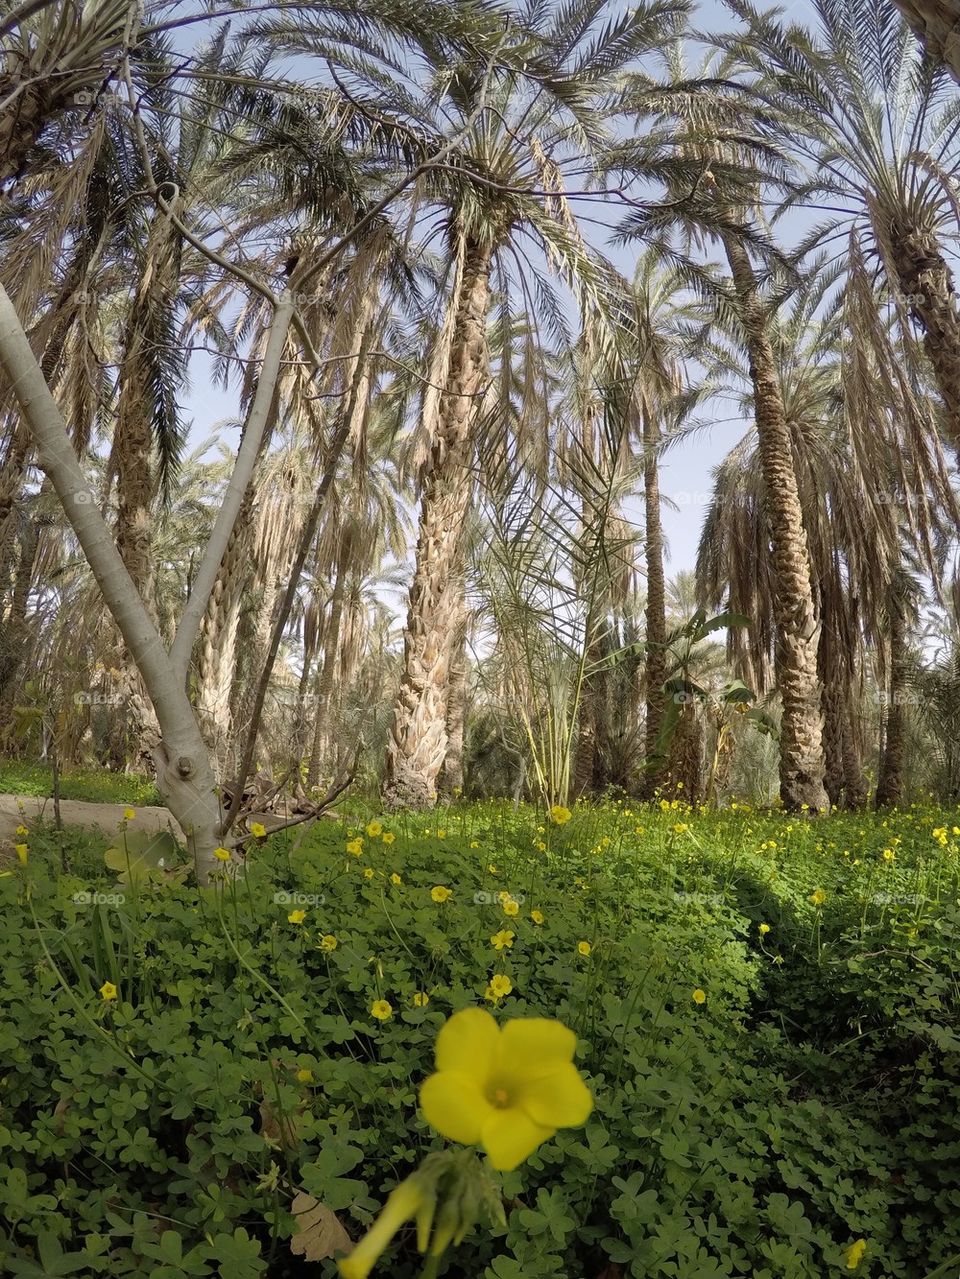 Date palm trees in a desert oasis in Tunisia with green grass growing around them 